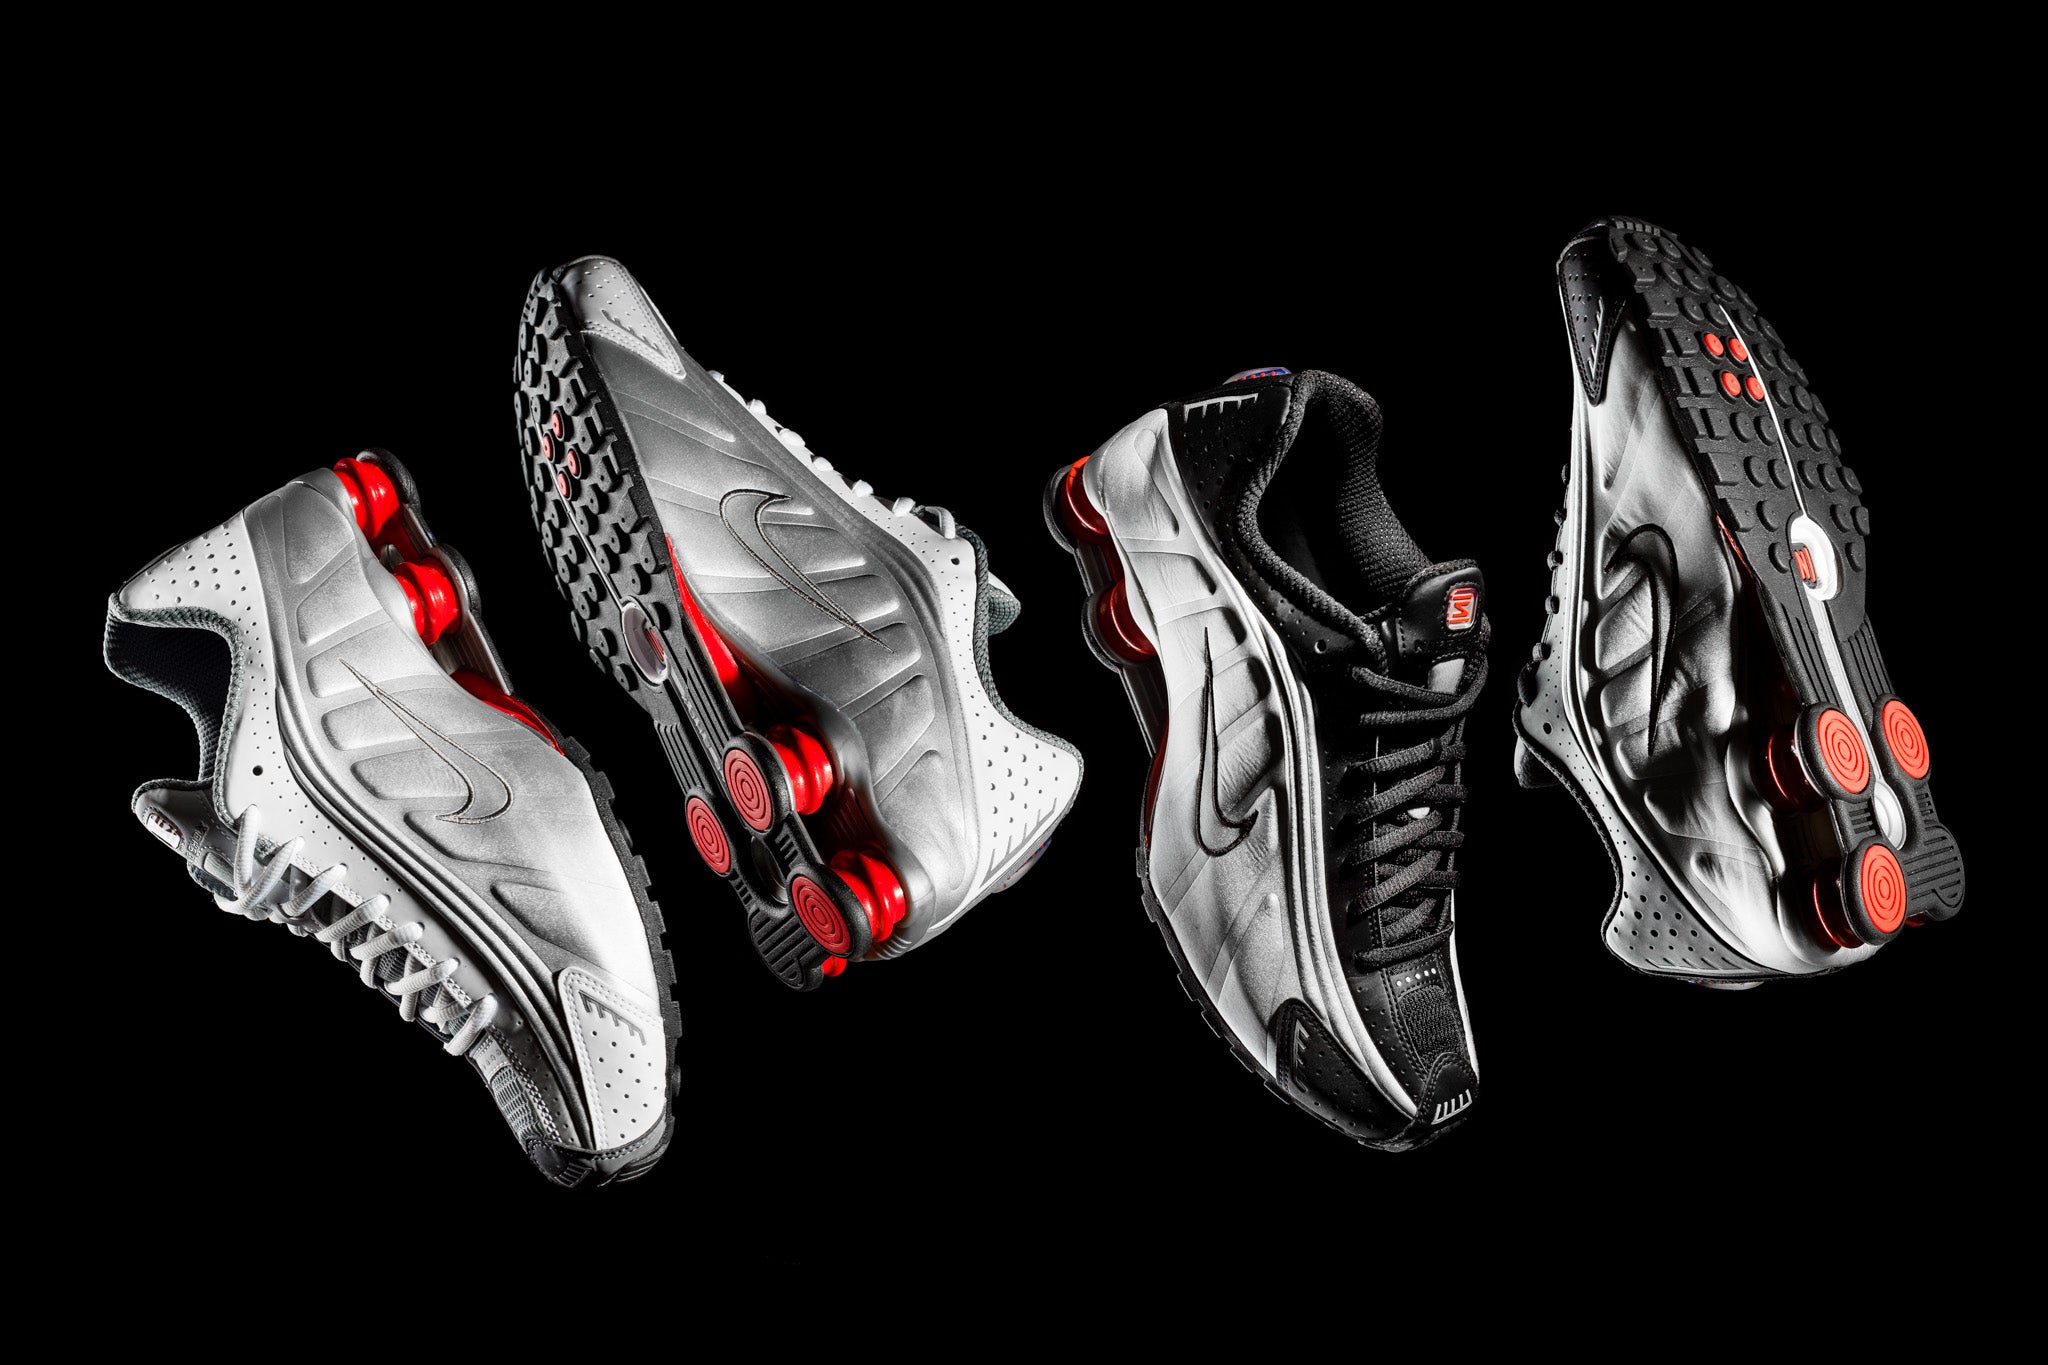 Nike Shox R4 Collection 05.17.19 – Capsule